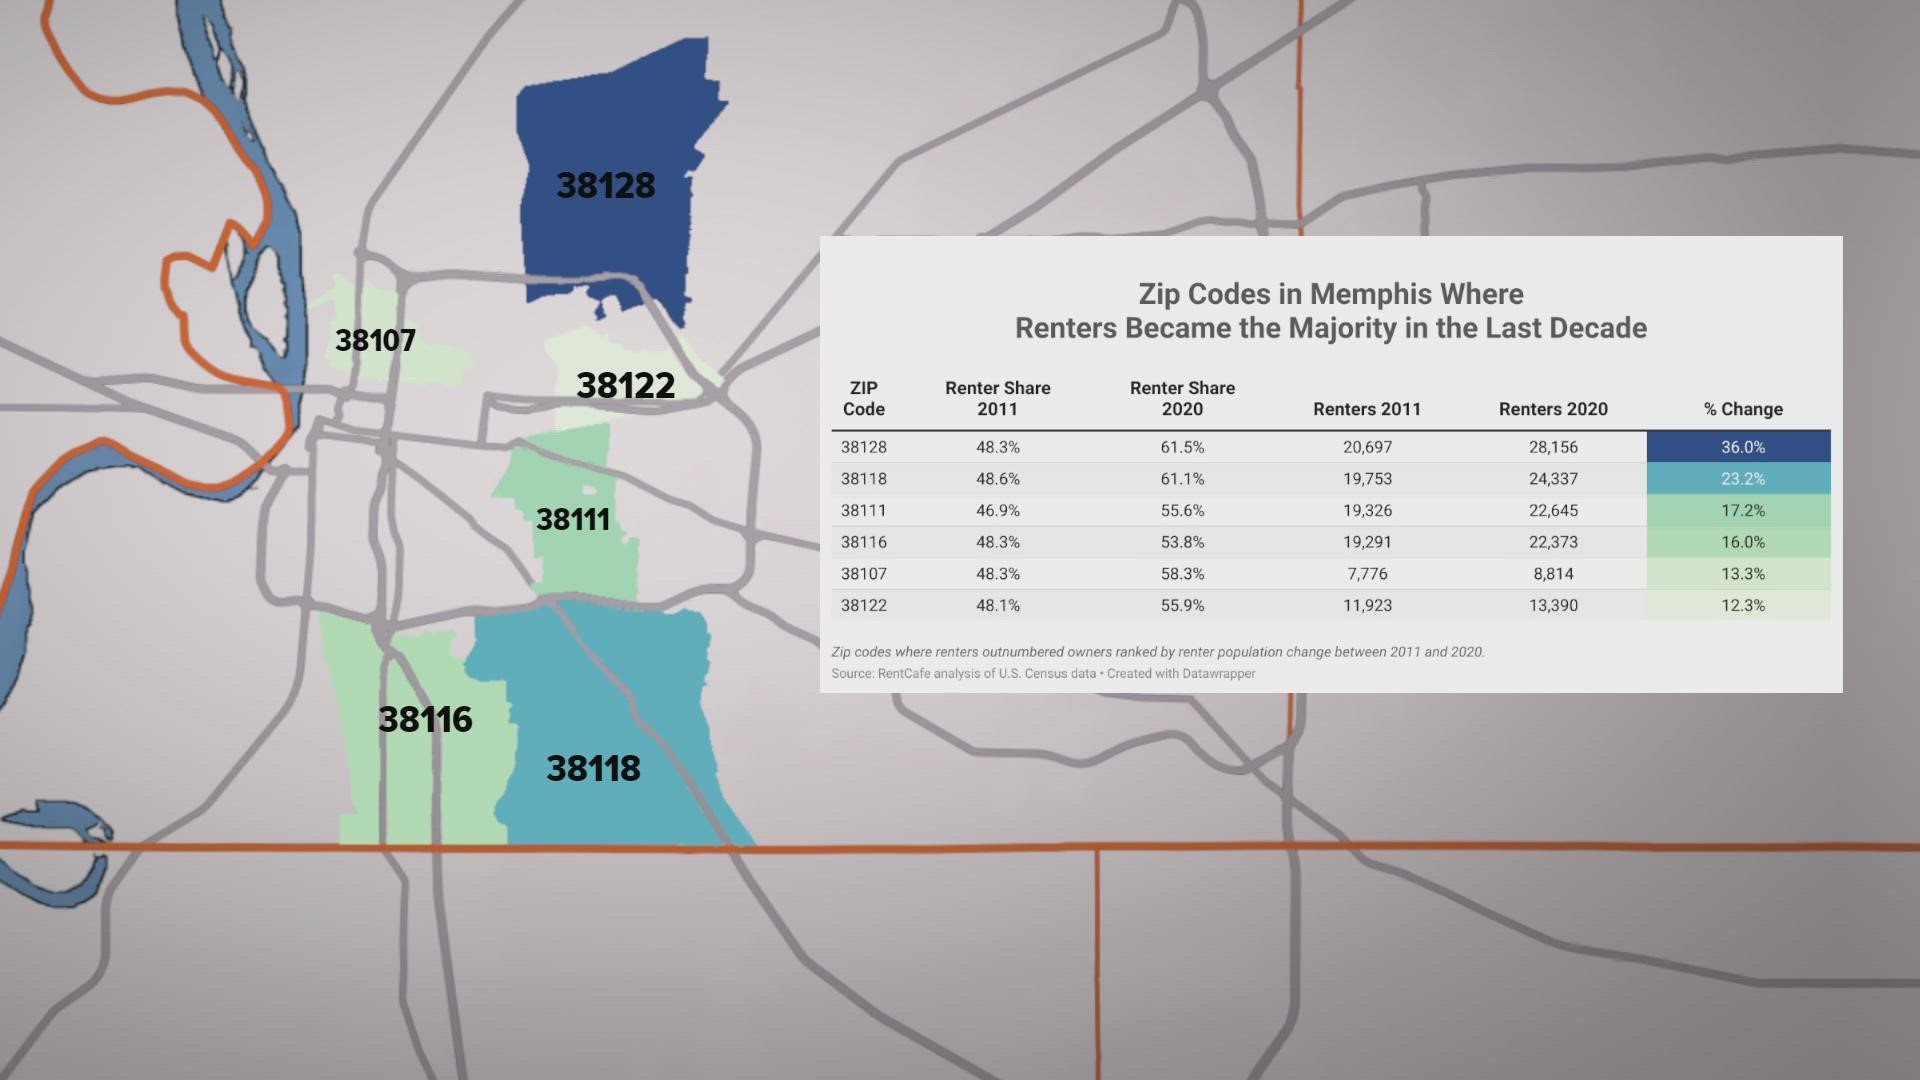 Richard Ransom explains why he thinks the surge of renters across Shelby County is hitting home.